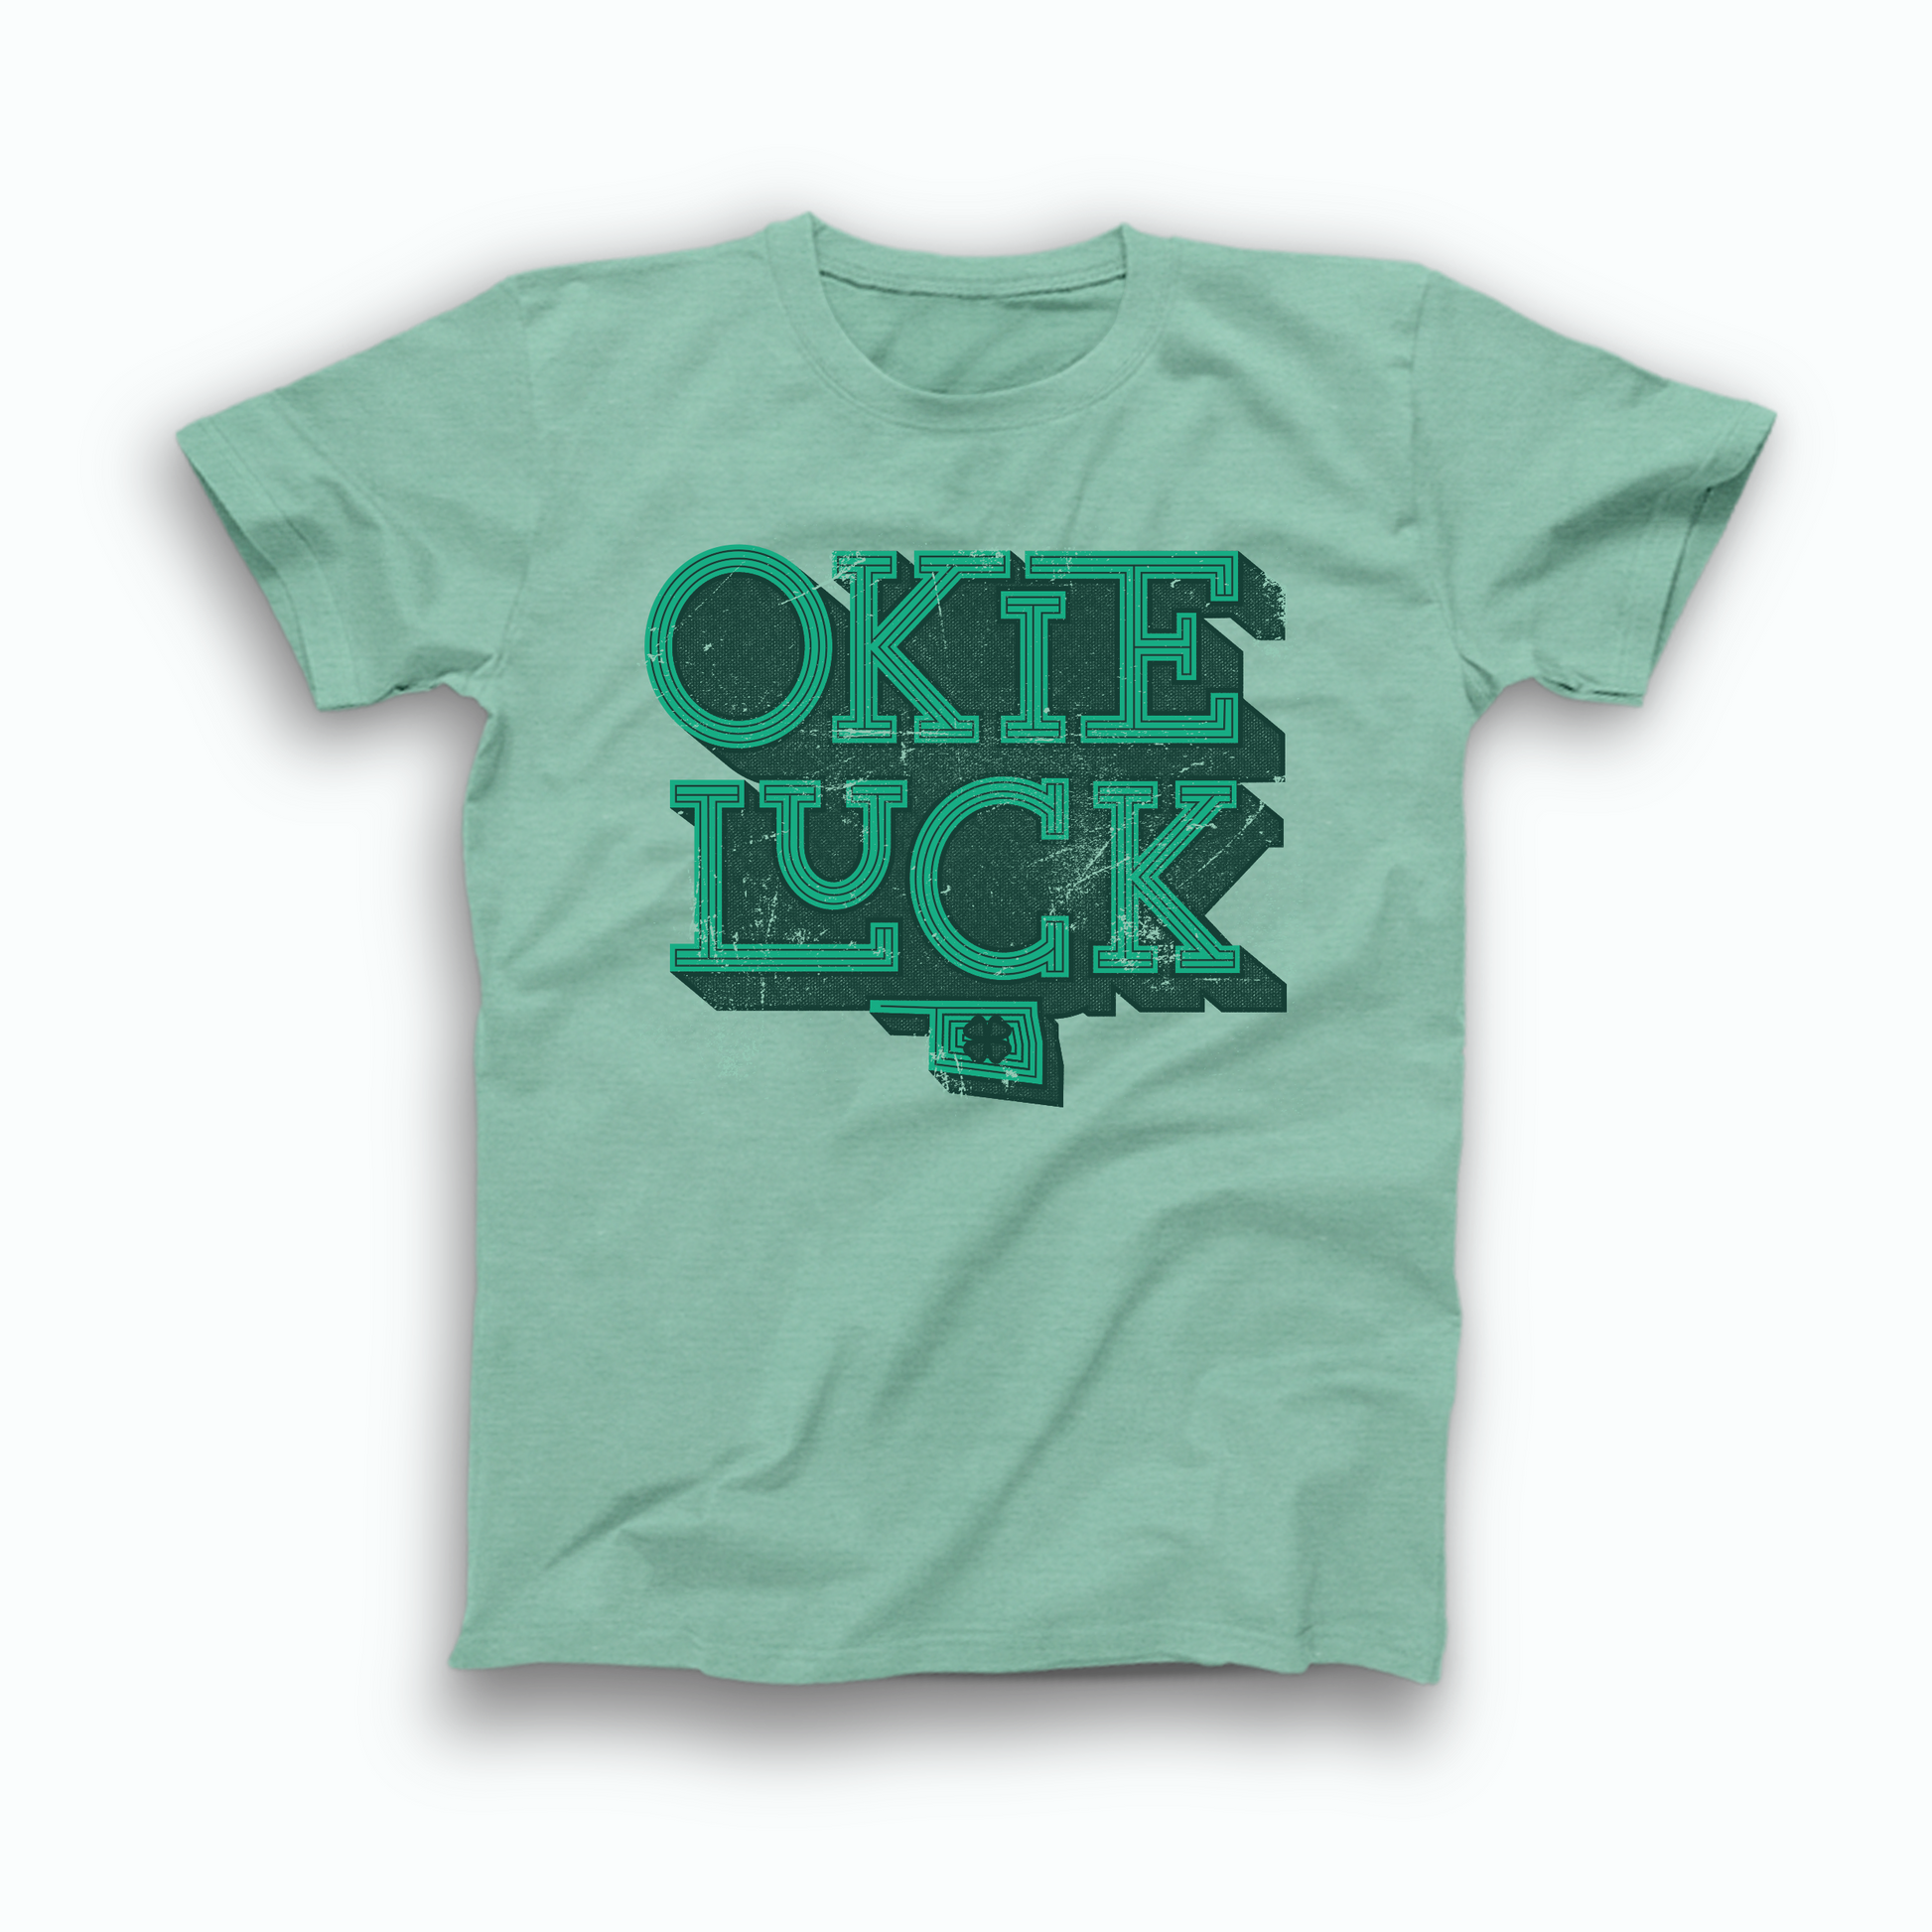 Mint green colored Oklahoma T-shirt. Screen printed in a distressed, vintage style in green with a dark green background is "OKIE" stacked atop "LUCK" with a small OK state symbol below and a 4 leaf clover inside the state. 